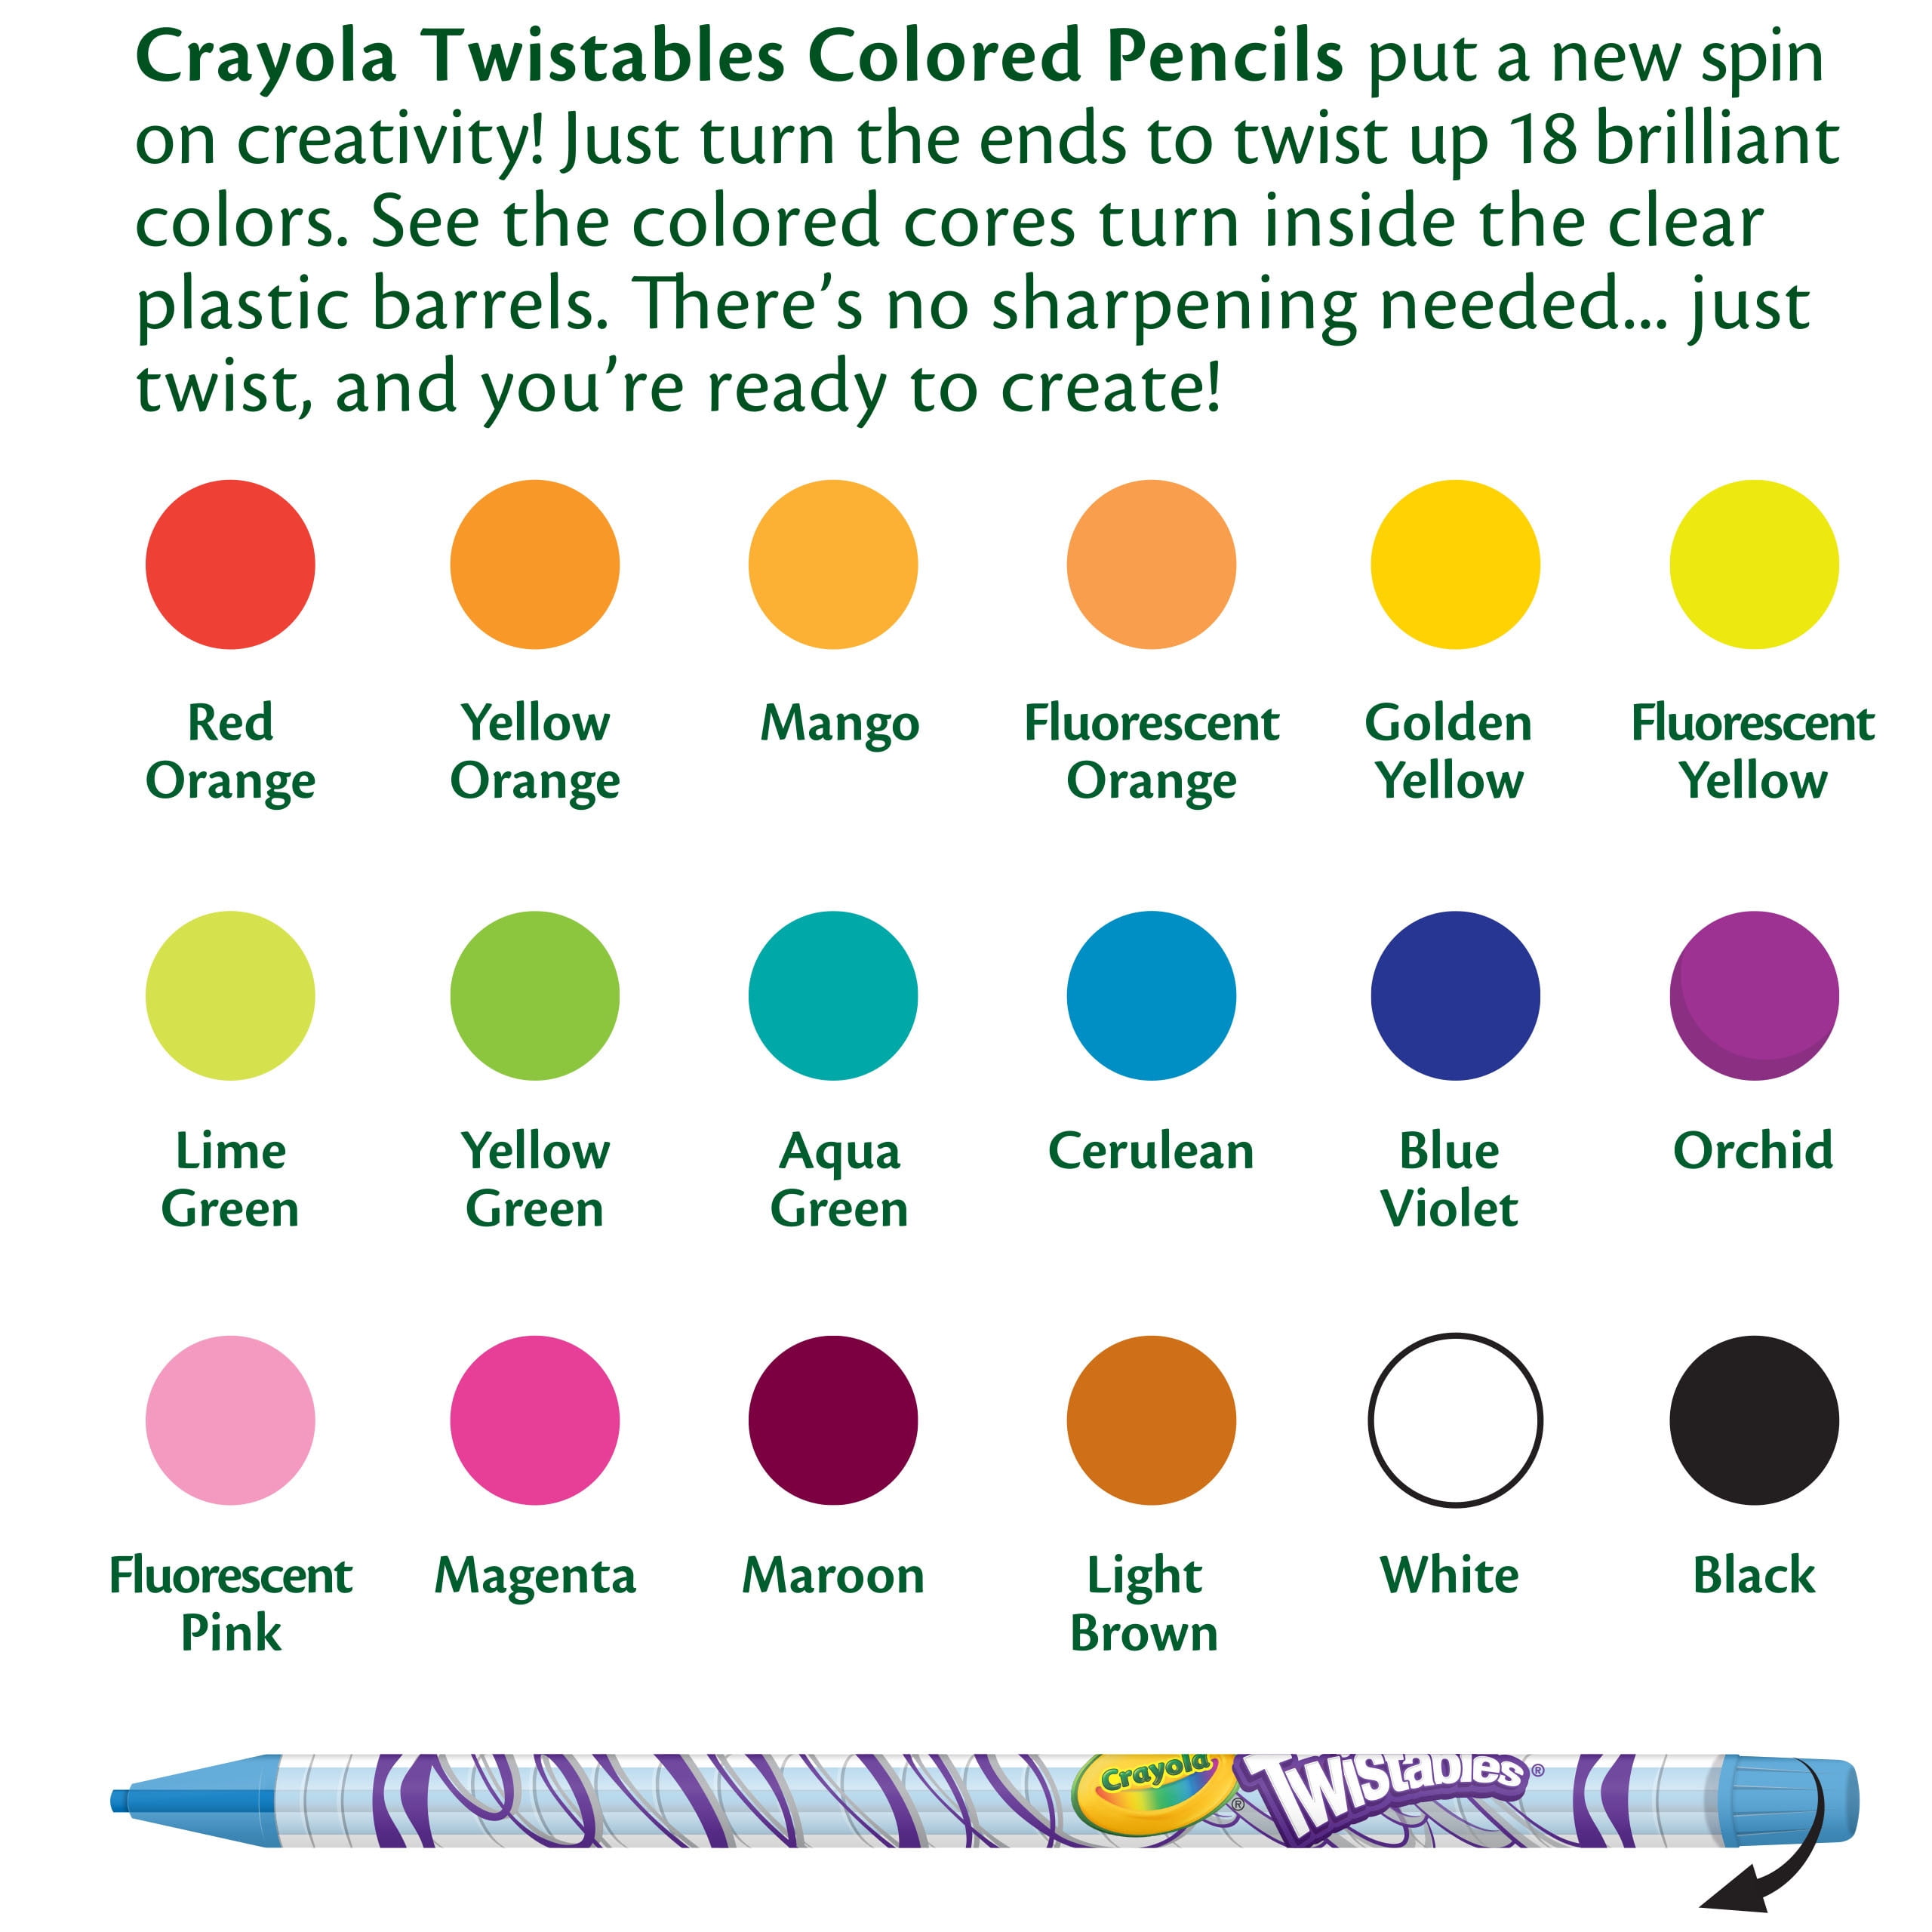 Crayola Twistables Colored Pencils 30 Countper Box, Set Of 2 Boxes